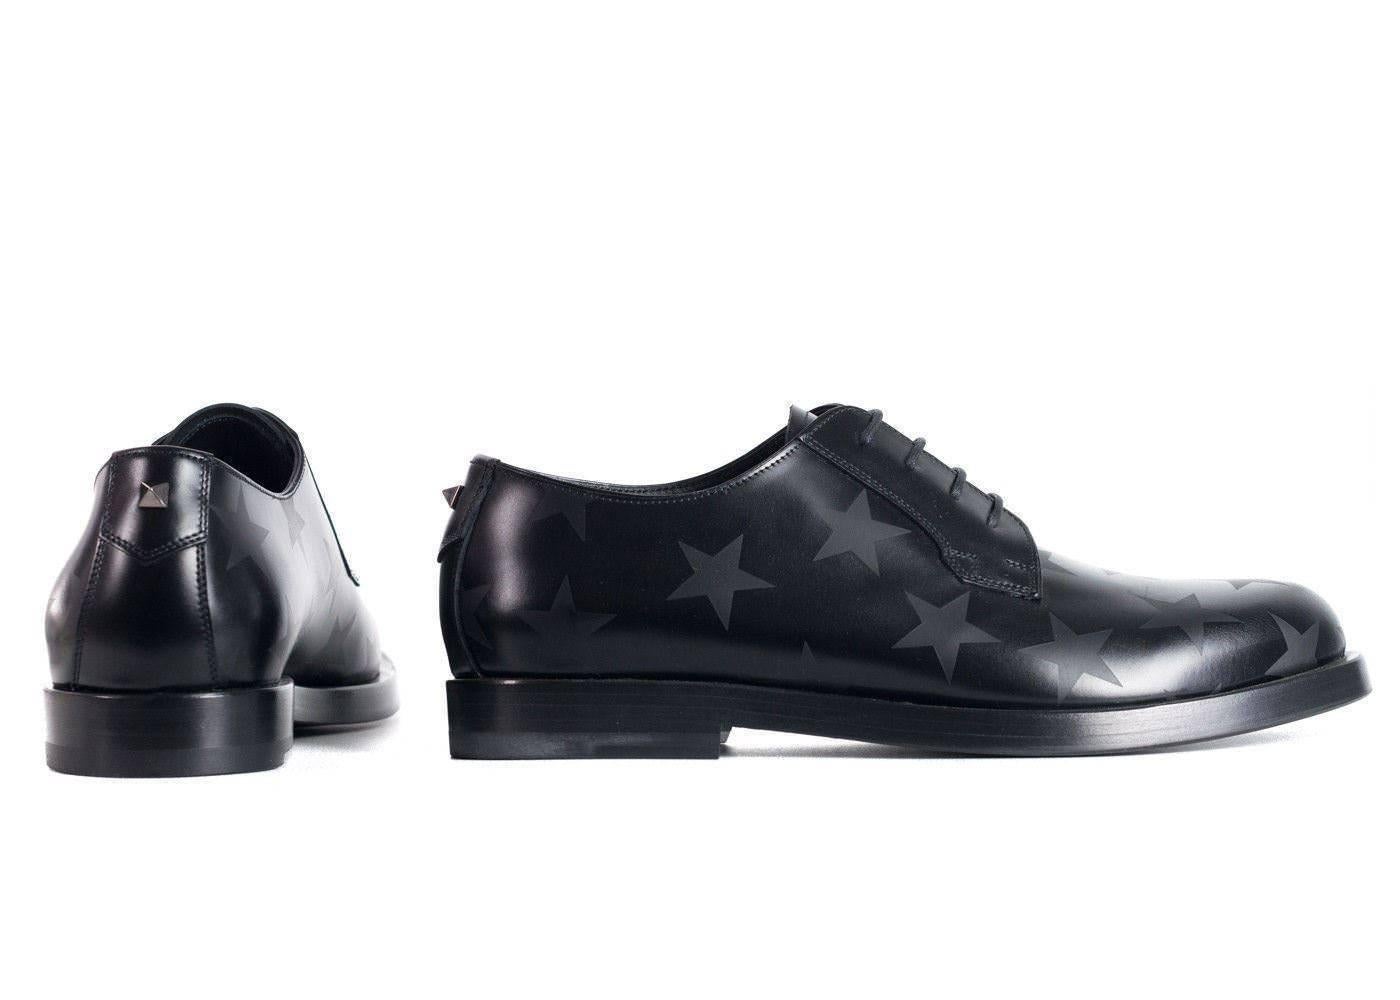 Take your style to the next level with this pair of Valentino Derby Oxfords. These shoes have been crafted from Italian leather in a black with monochromatic printed stars, that offers a semi-shiny smooth finish. Featuring a smooth stacked wooden